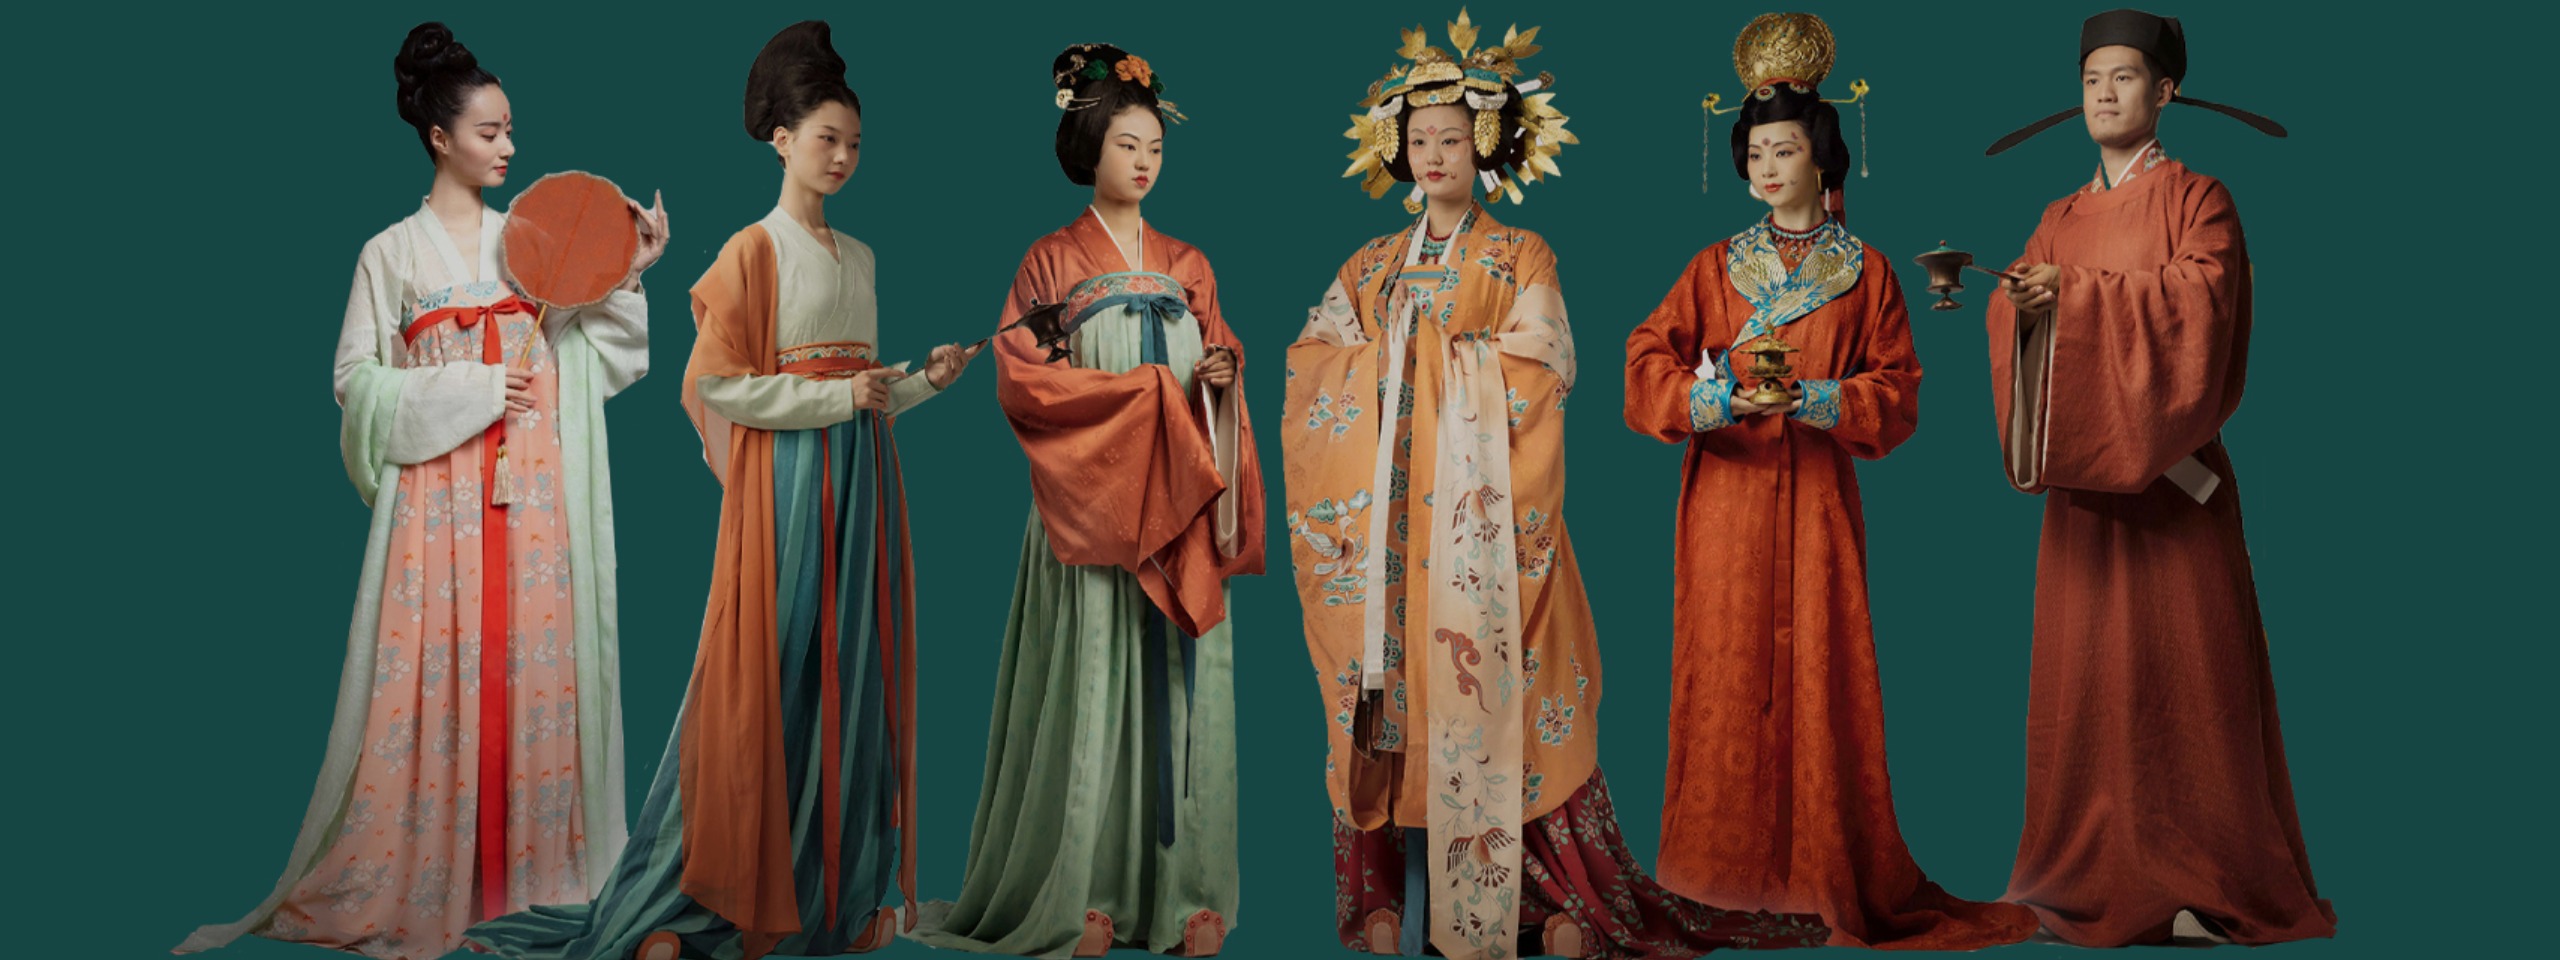 Chinese Culture Talk: Bronze Artefacts and Clothing | City of Sydney - What's On